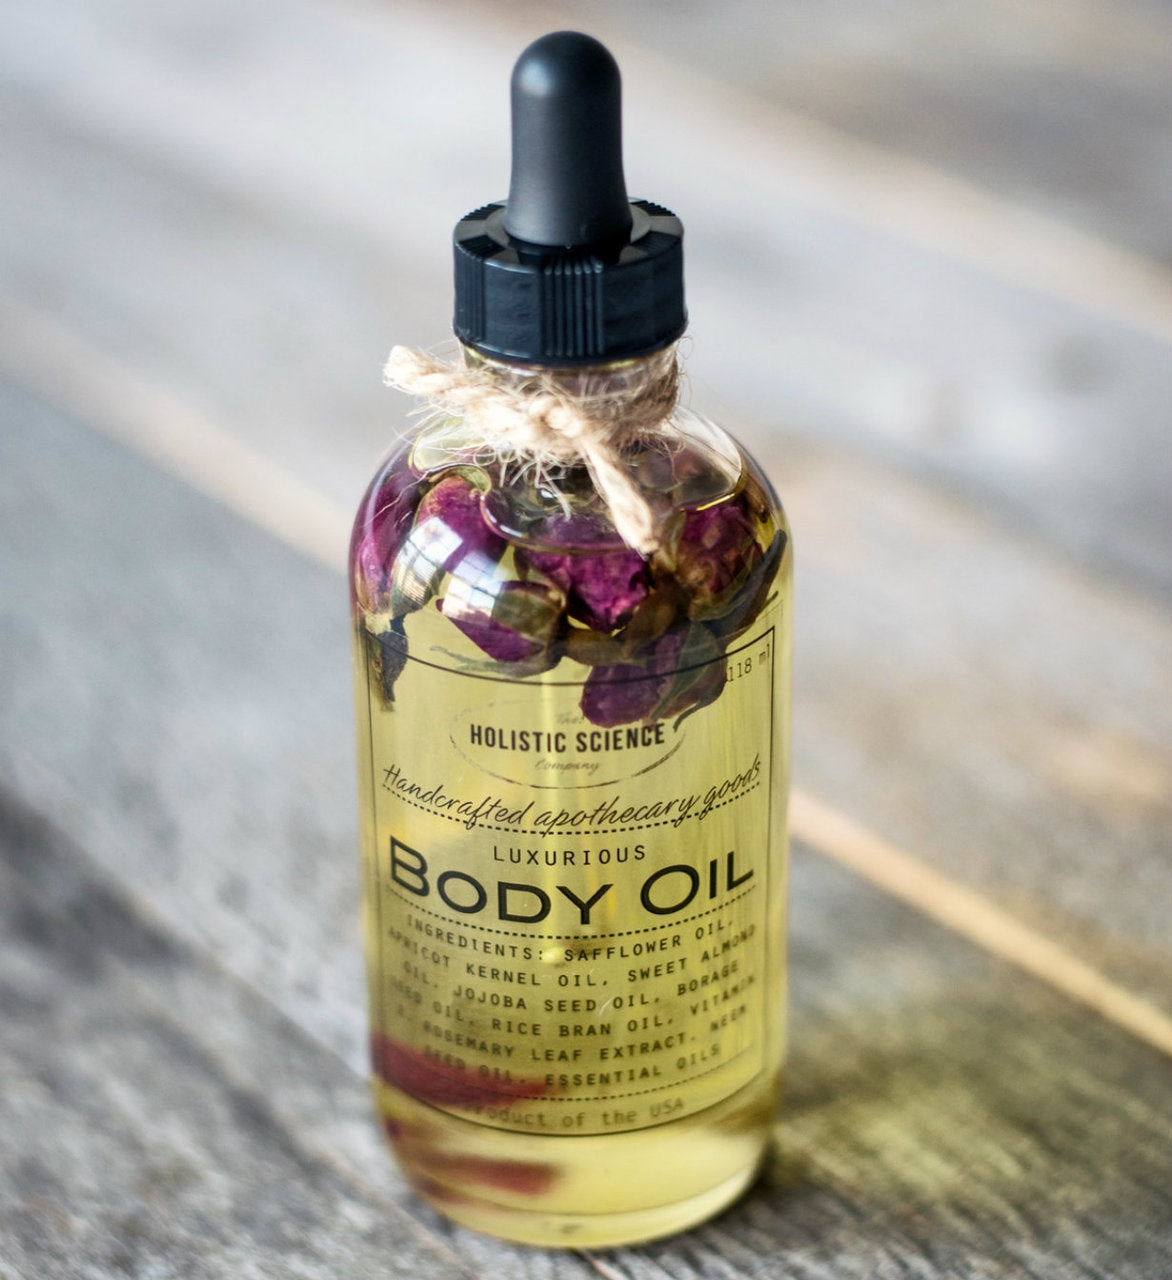 Rose Bath and Body Oil by Holistic Science